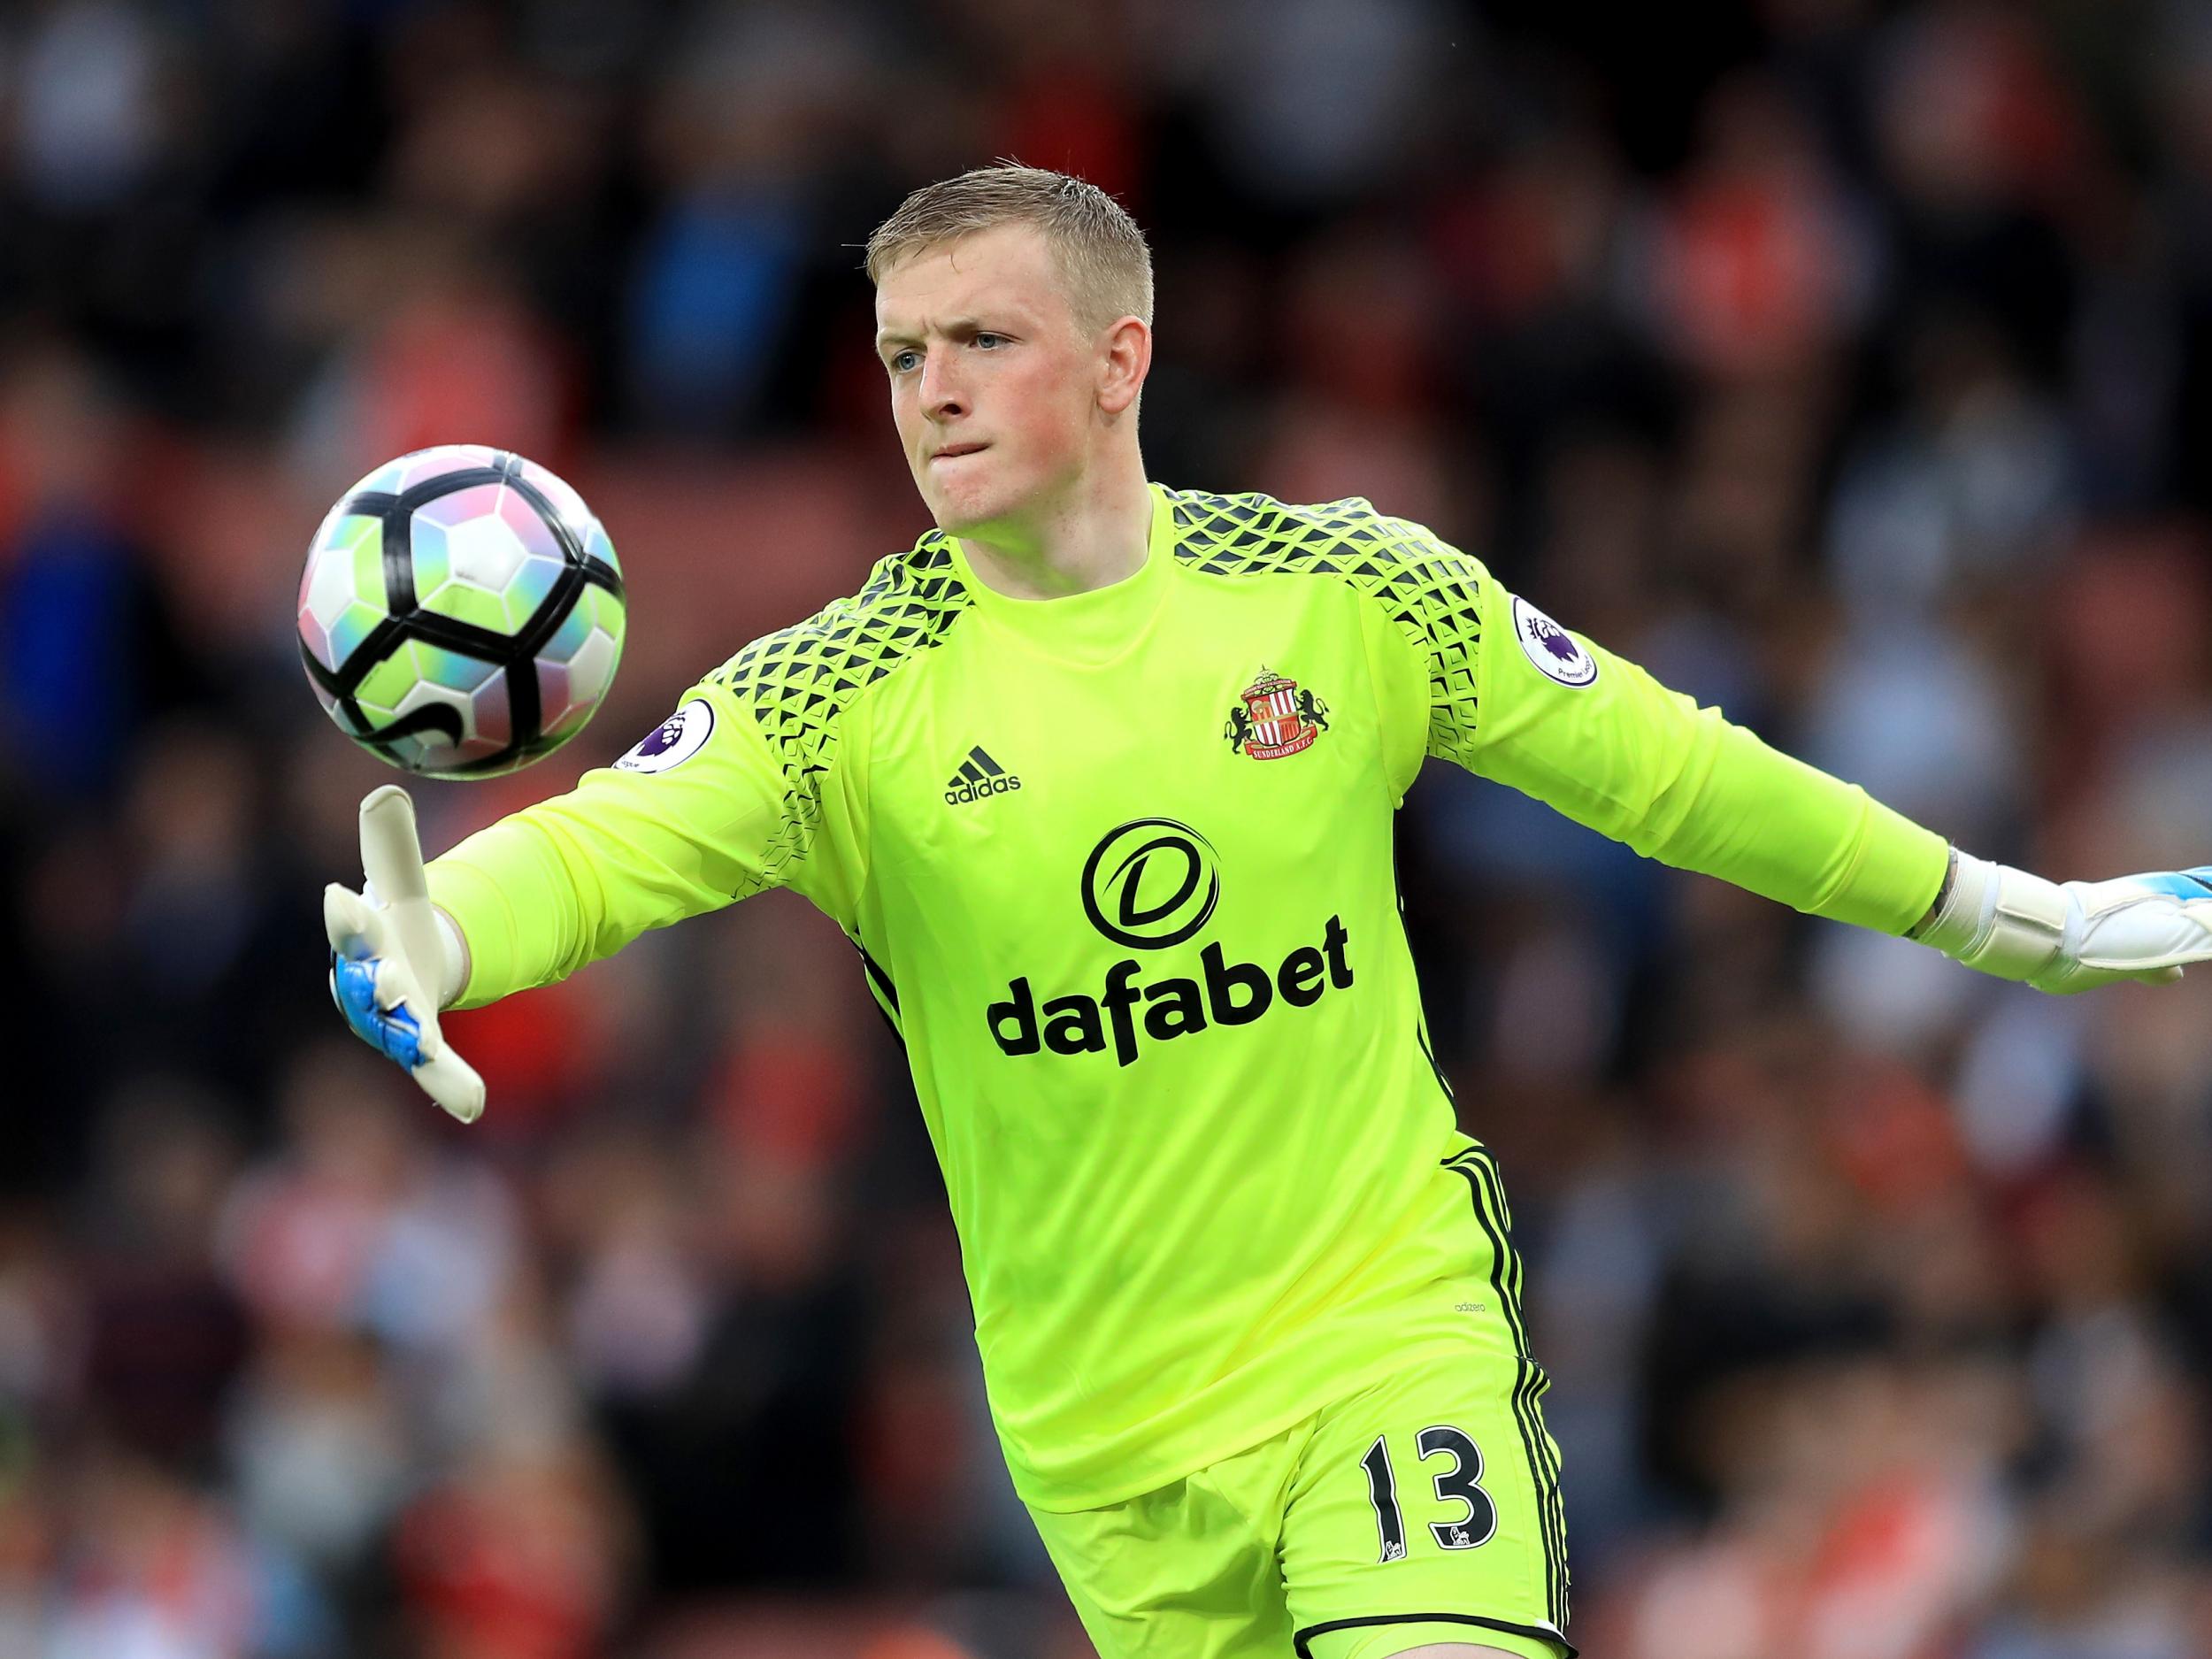 Pickford furthered his reputation with a fine performance